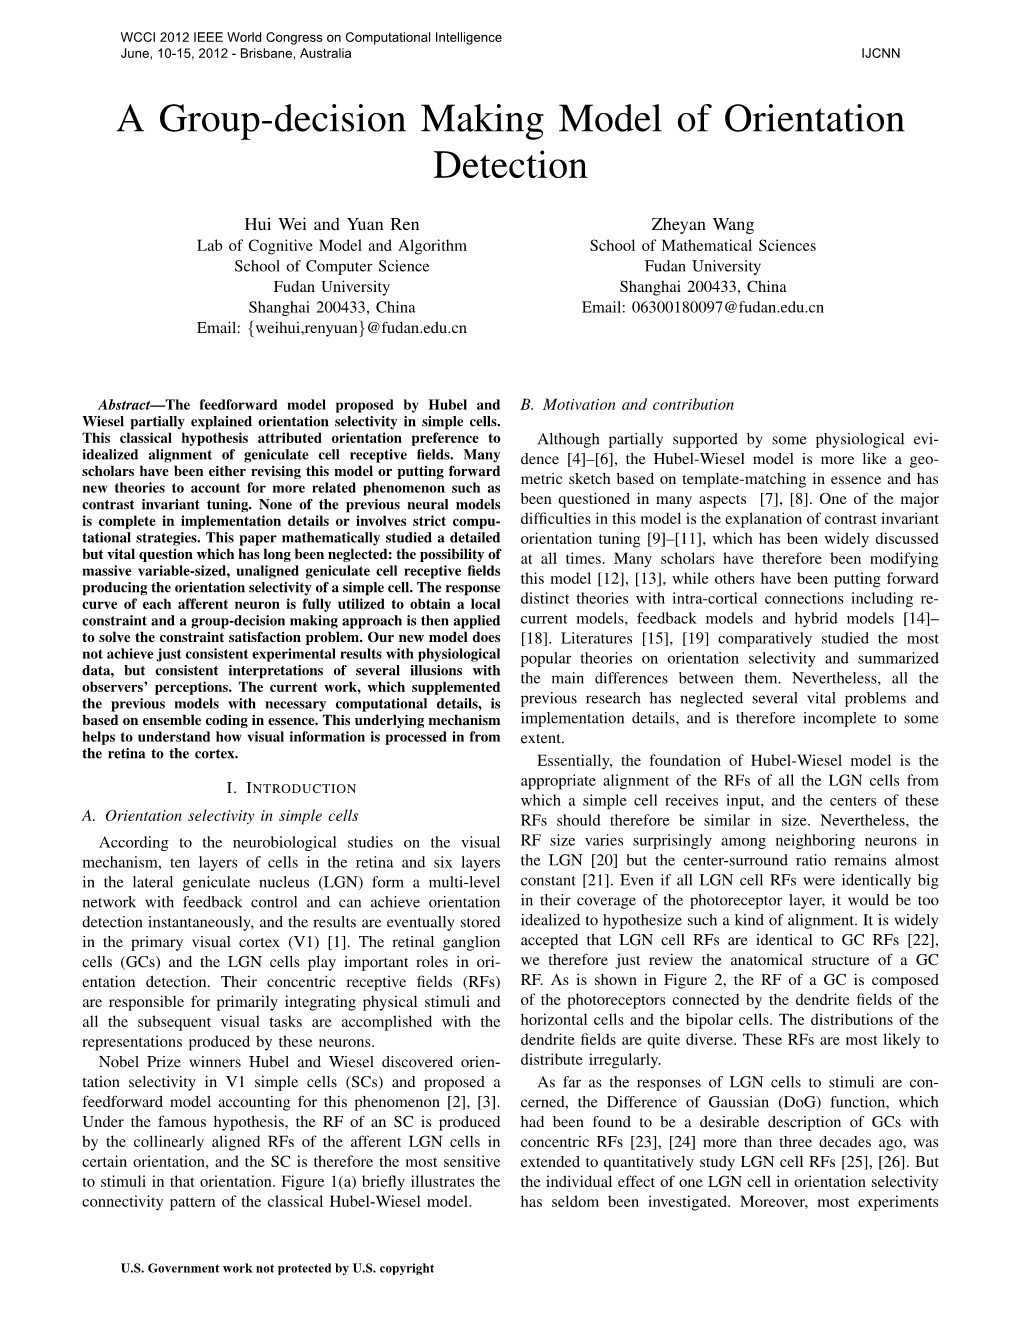 A Group-Decision Making Model of Orientation Detection